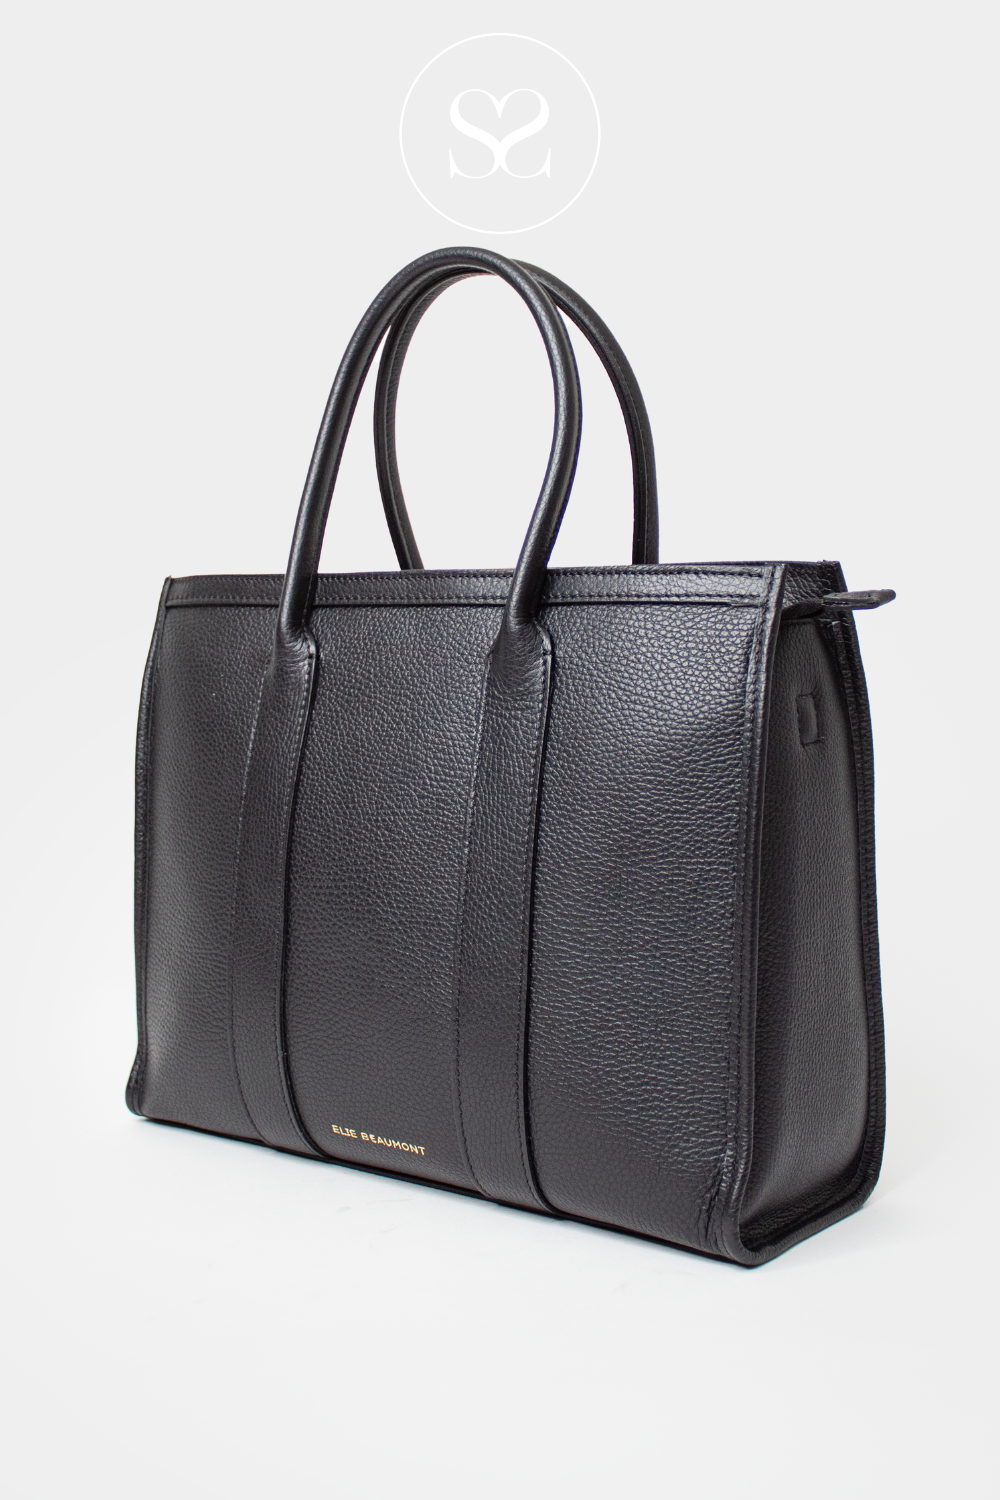 ELIE BEAUMONT BLACK LEATHER DAYBAG